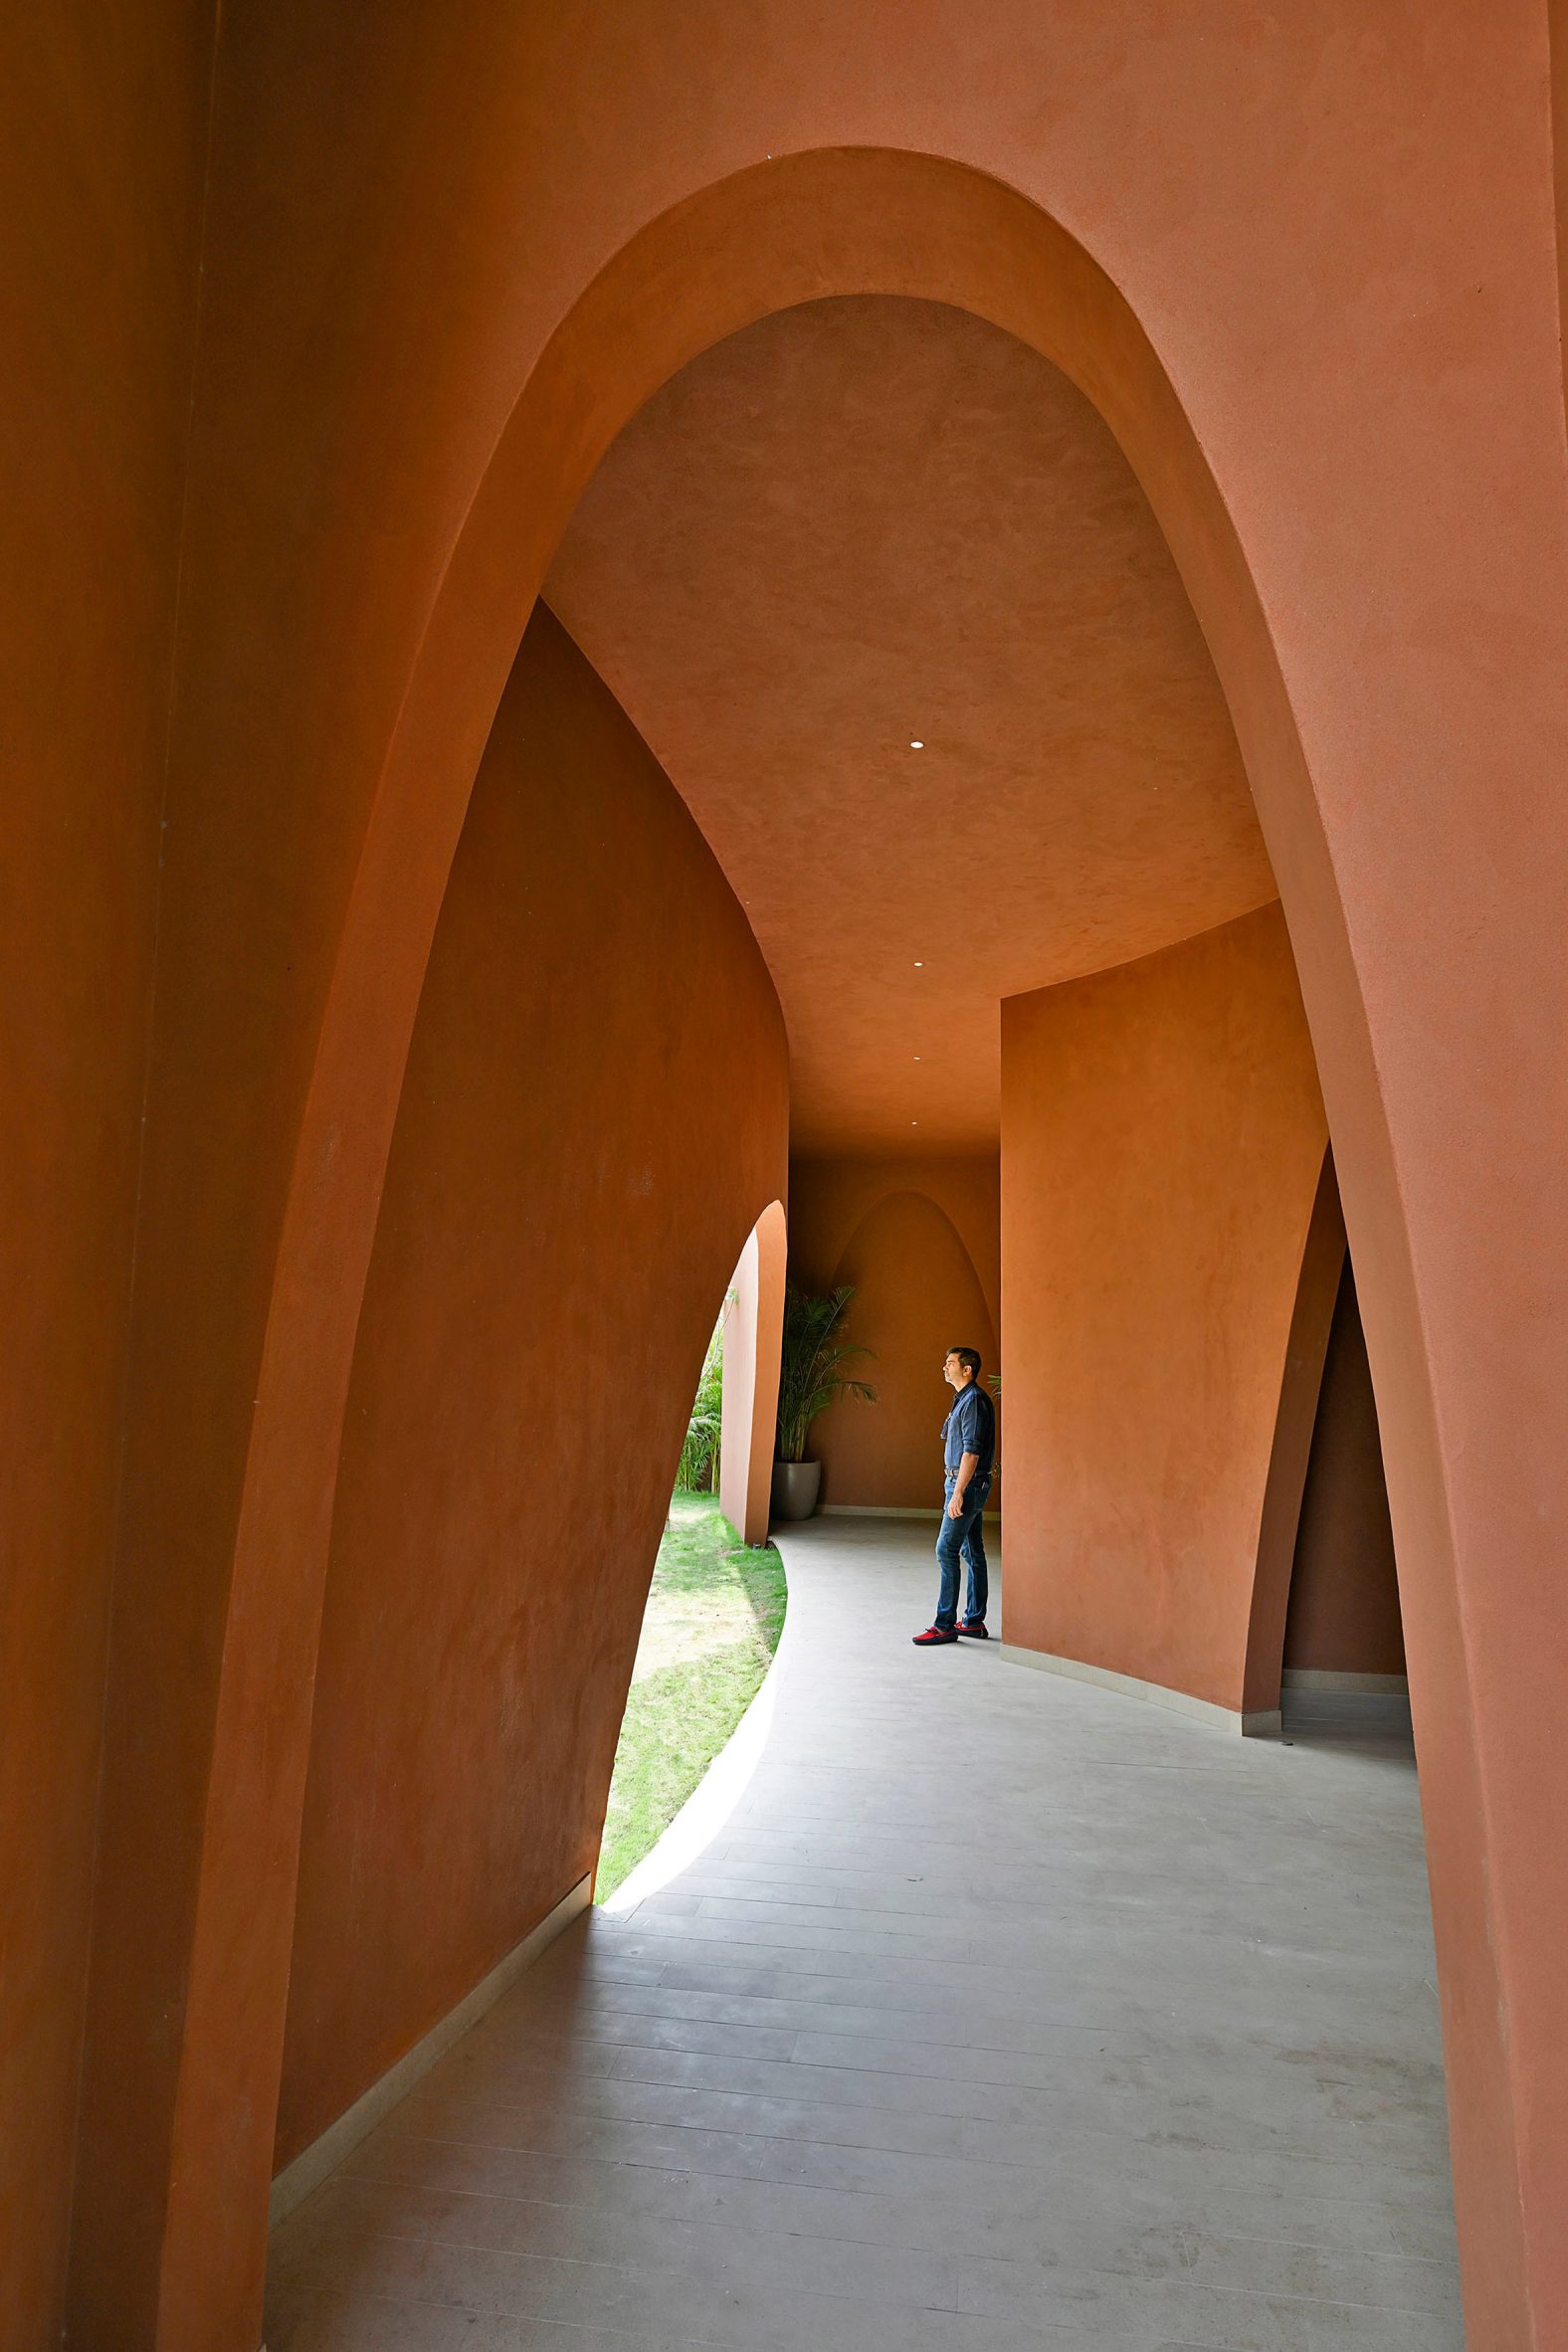 Image with arches leading to a garden